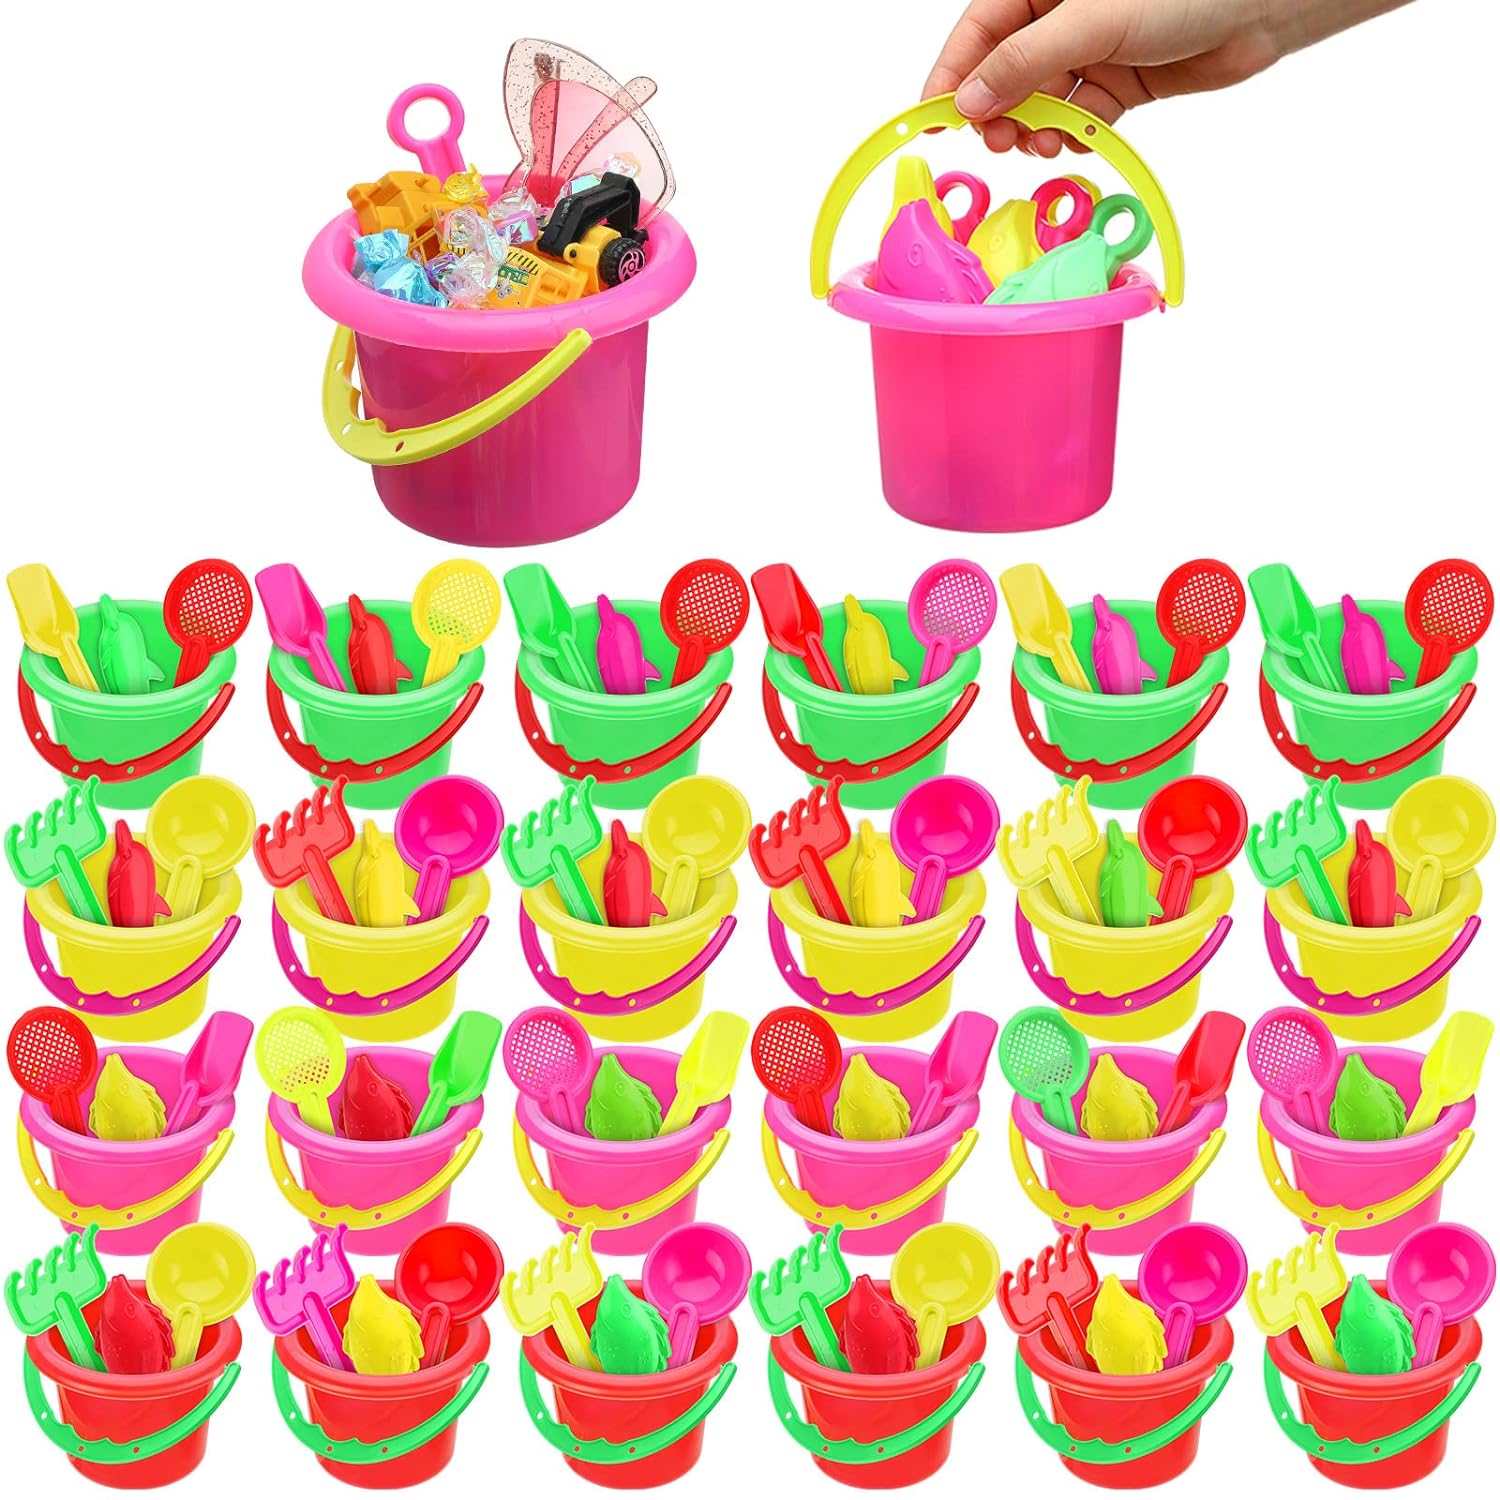 thinkstar 24 Set Sand Buckets And Shovels For Kids 3.94" Mini Sand Bucket Party Favor Sand Box Play Set And Mini Beach Sand Pail Incl…